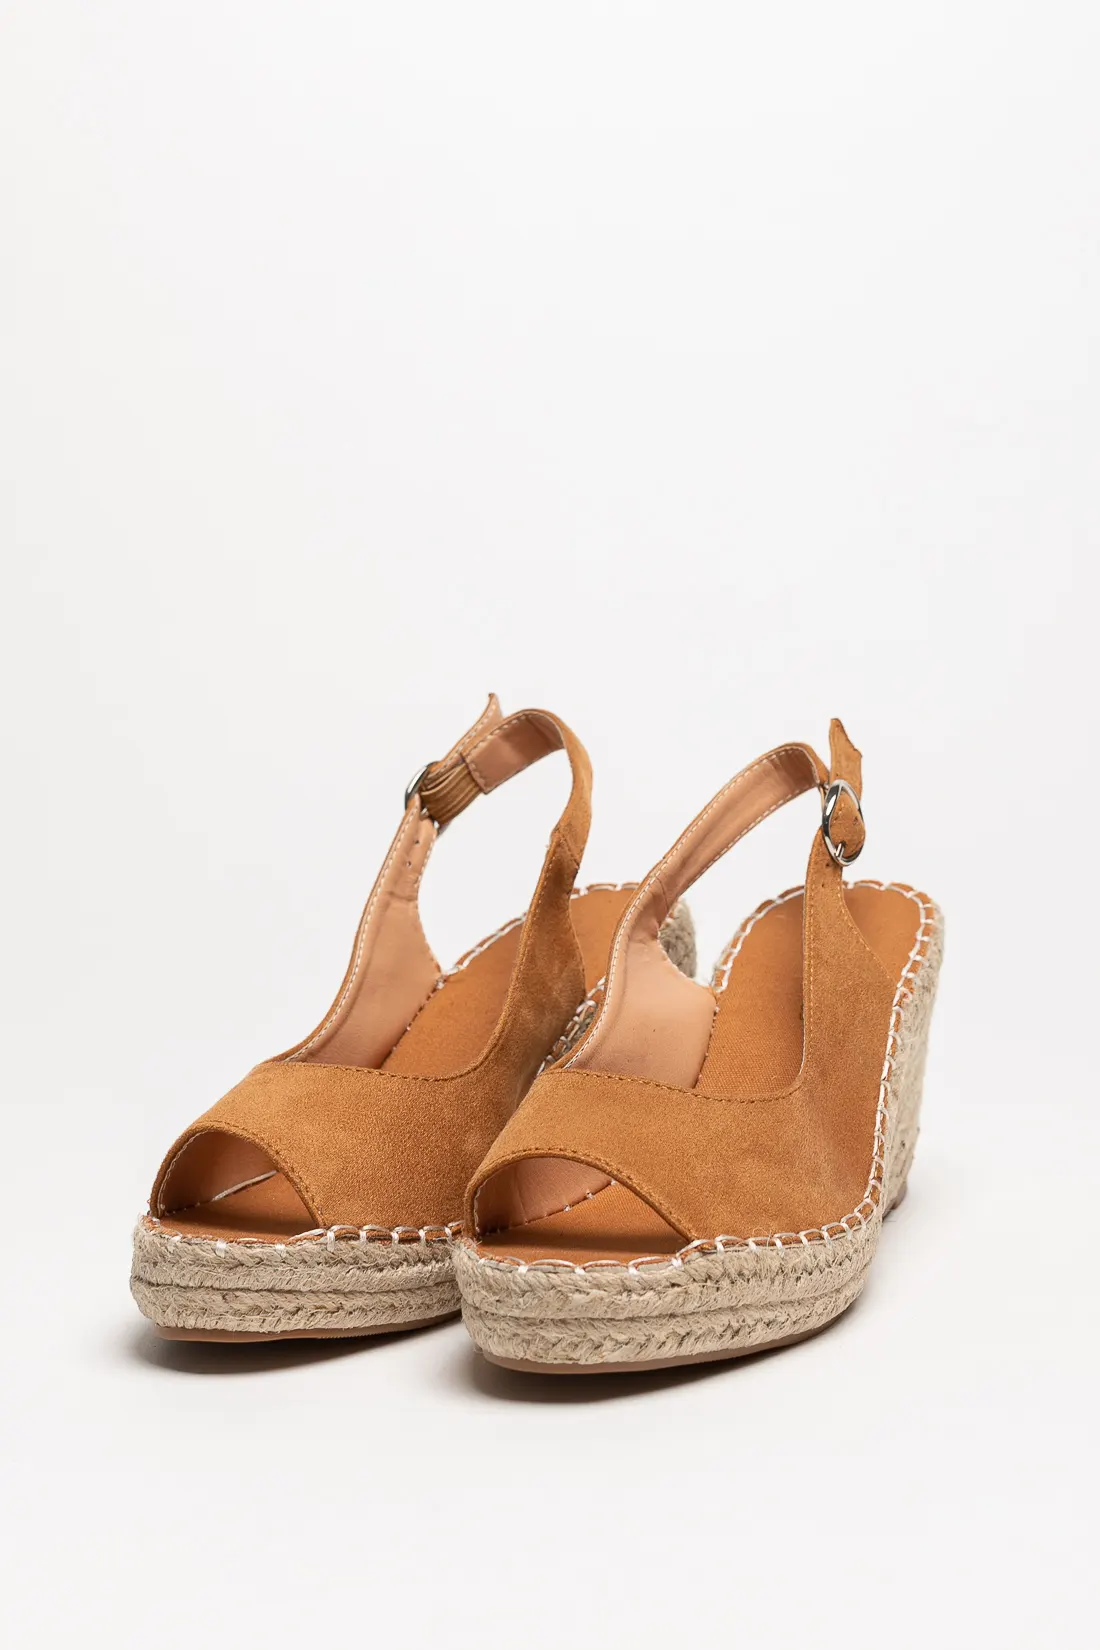 LEANDRA WEDGE - CAMELO